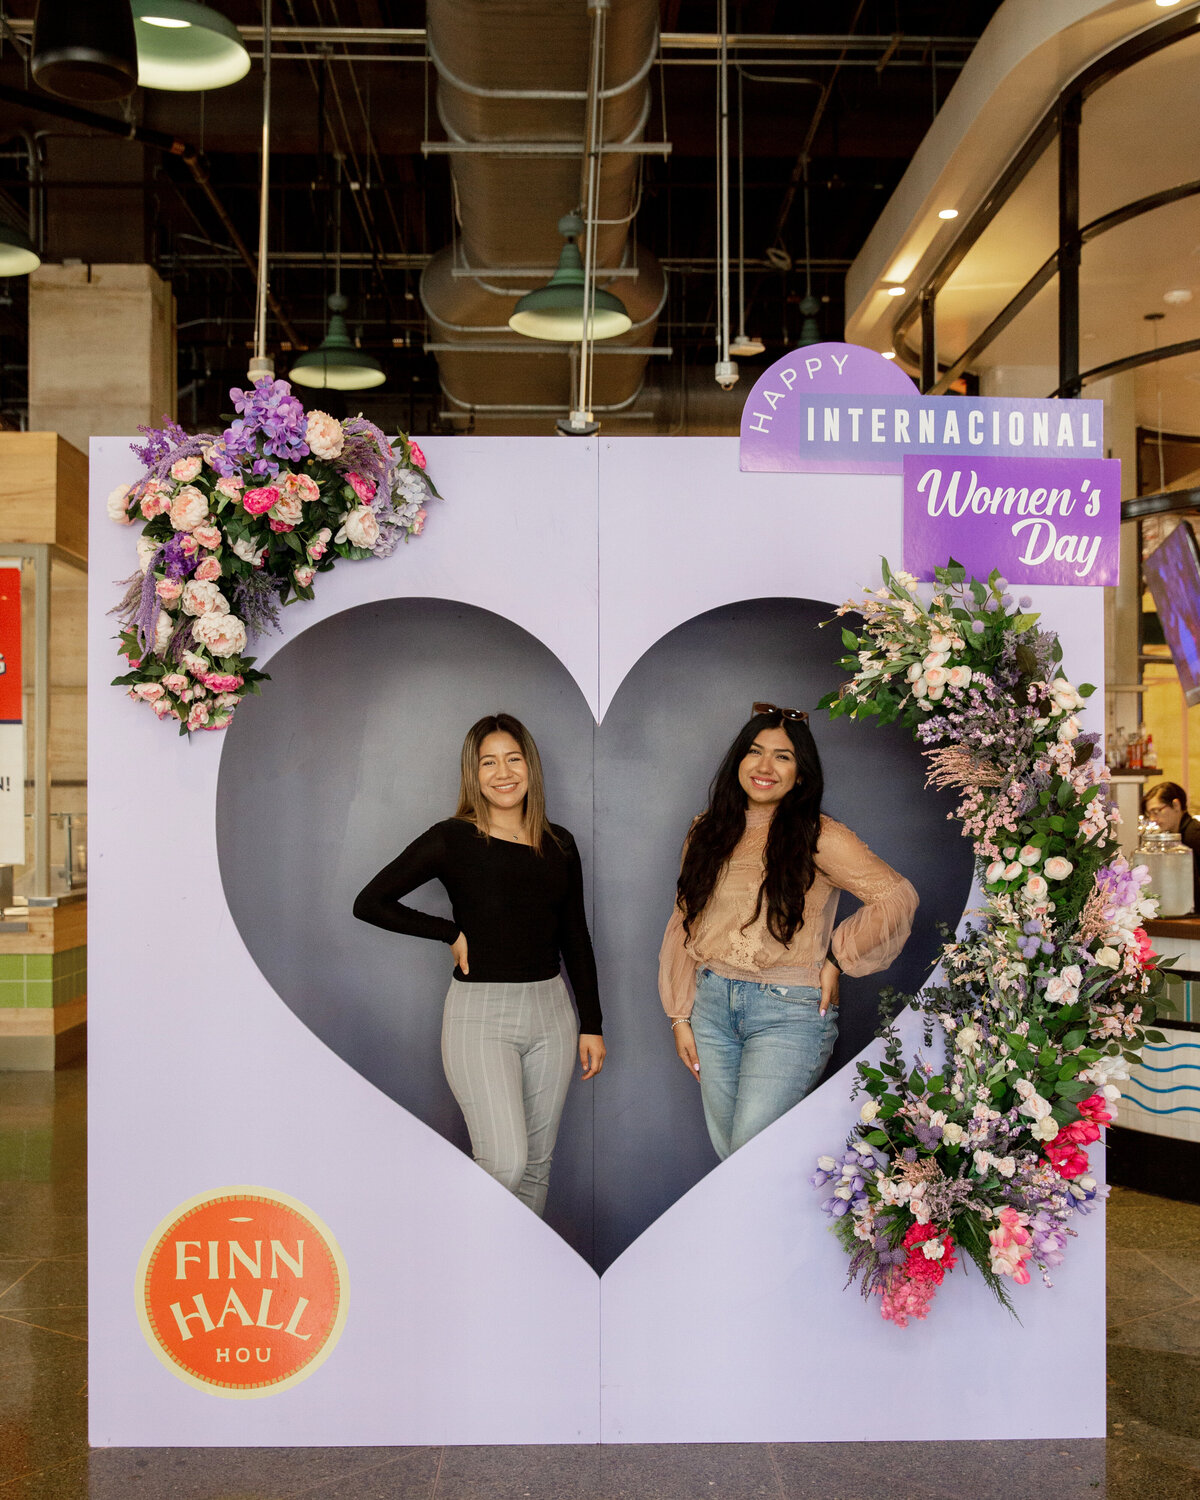 Two women posing in a purple heart shaped photo booth backdrop display decorated with florals for International Women's Day